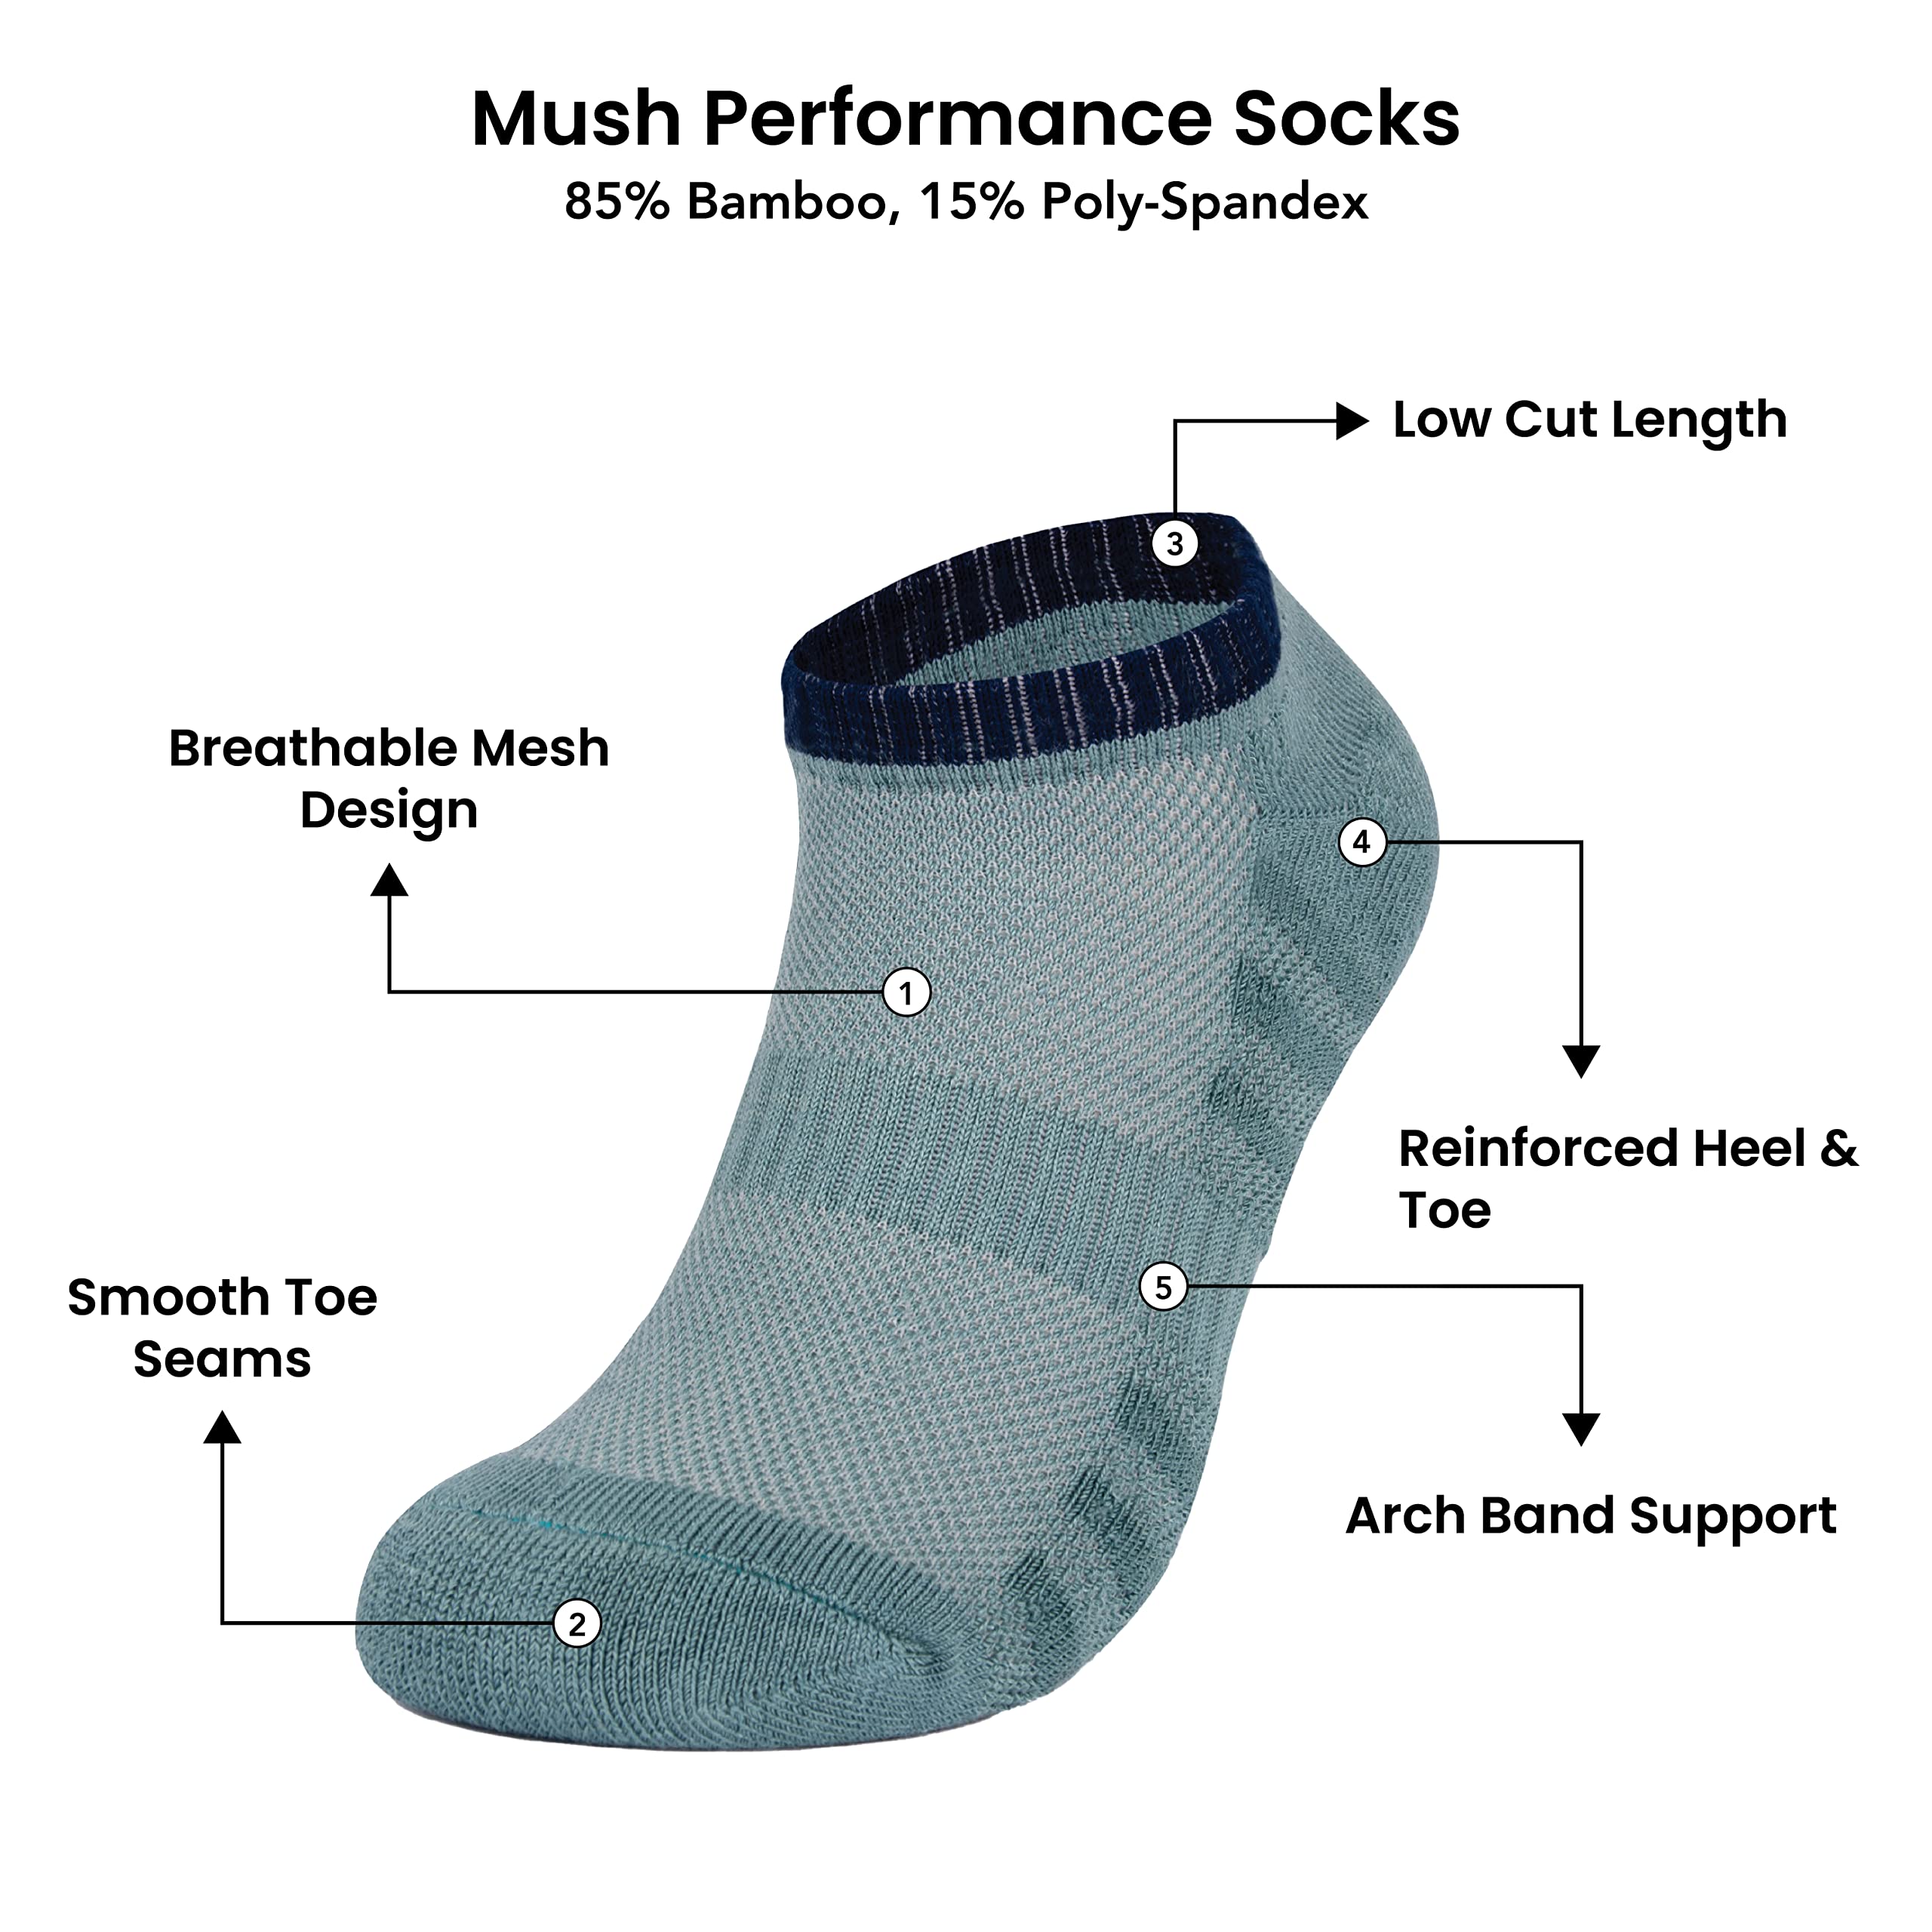 Mush Bamboo Socks for Sports & Casual Wear- Ultra Soft, Anti Odor, Breathable Mesh Design Low Cut Ankle Length Pack of 3 , (Navy, Charcoal green, Sea green,) UK Size 6-10